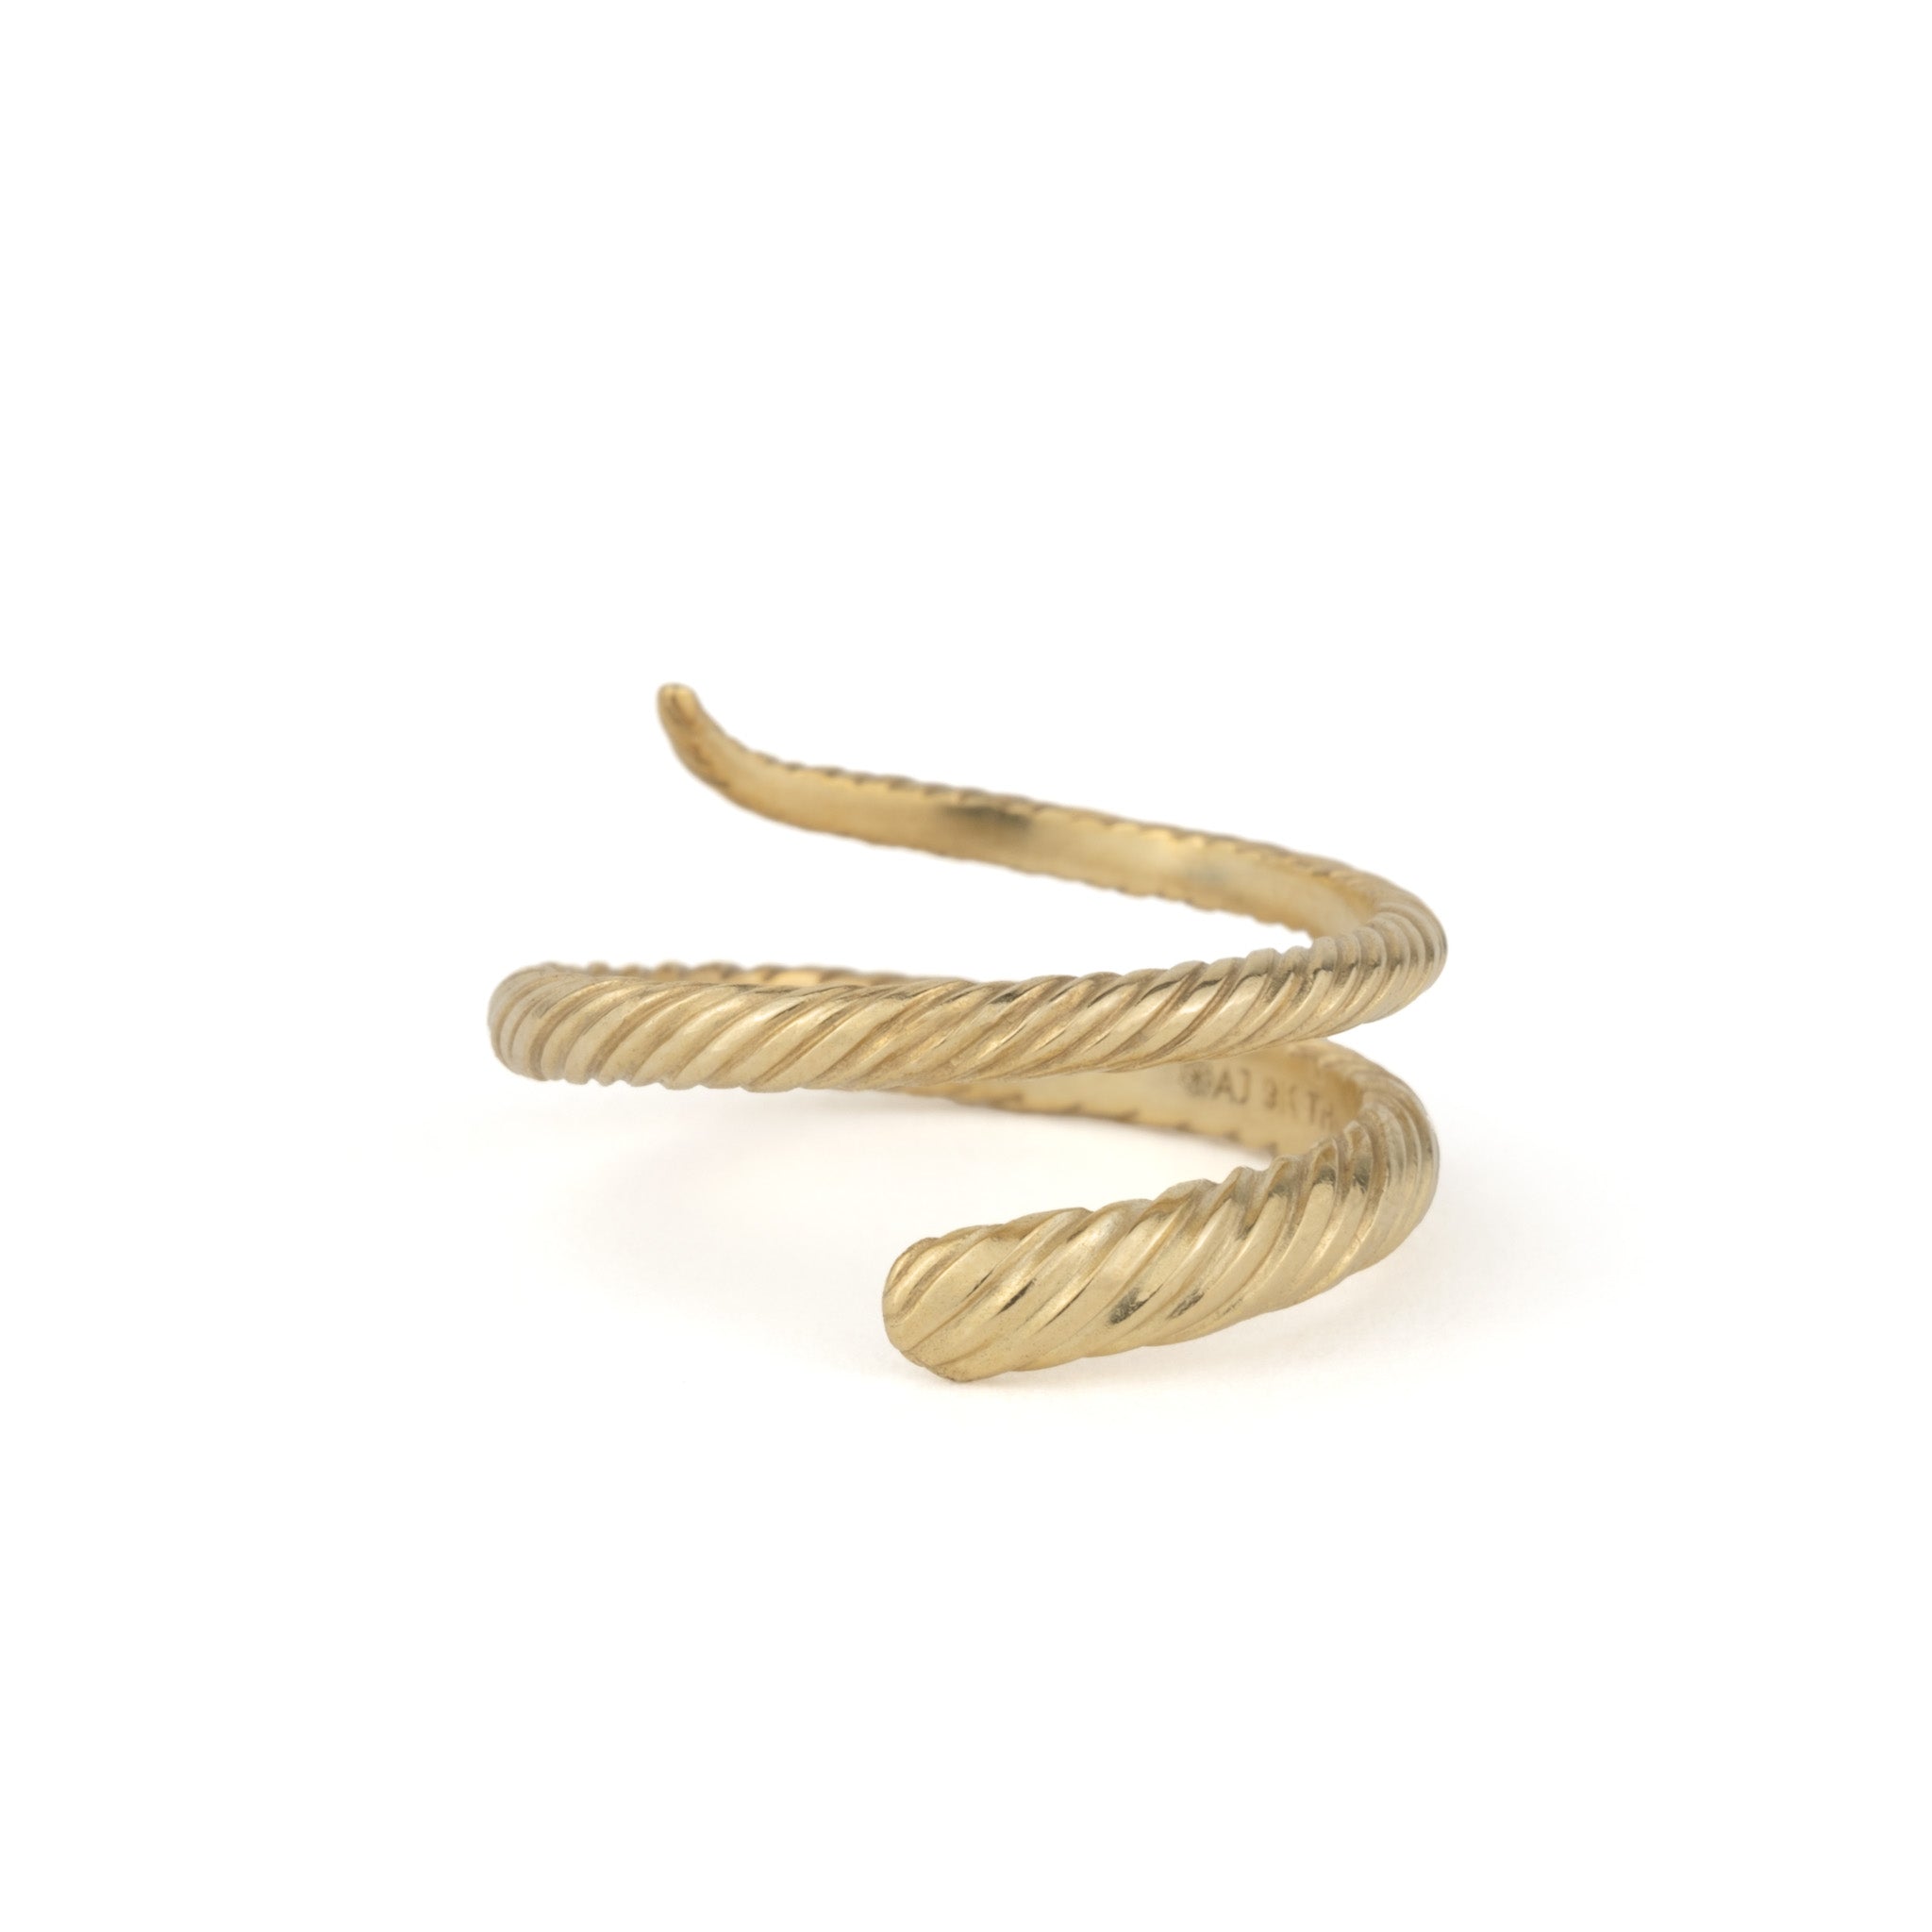 An Aiden Jae Banyan Wrap Ring on a white background.